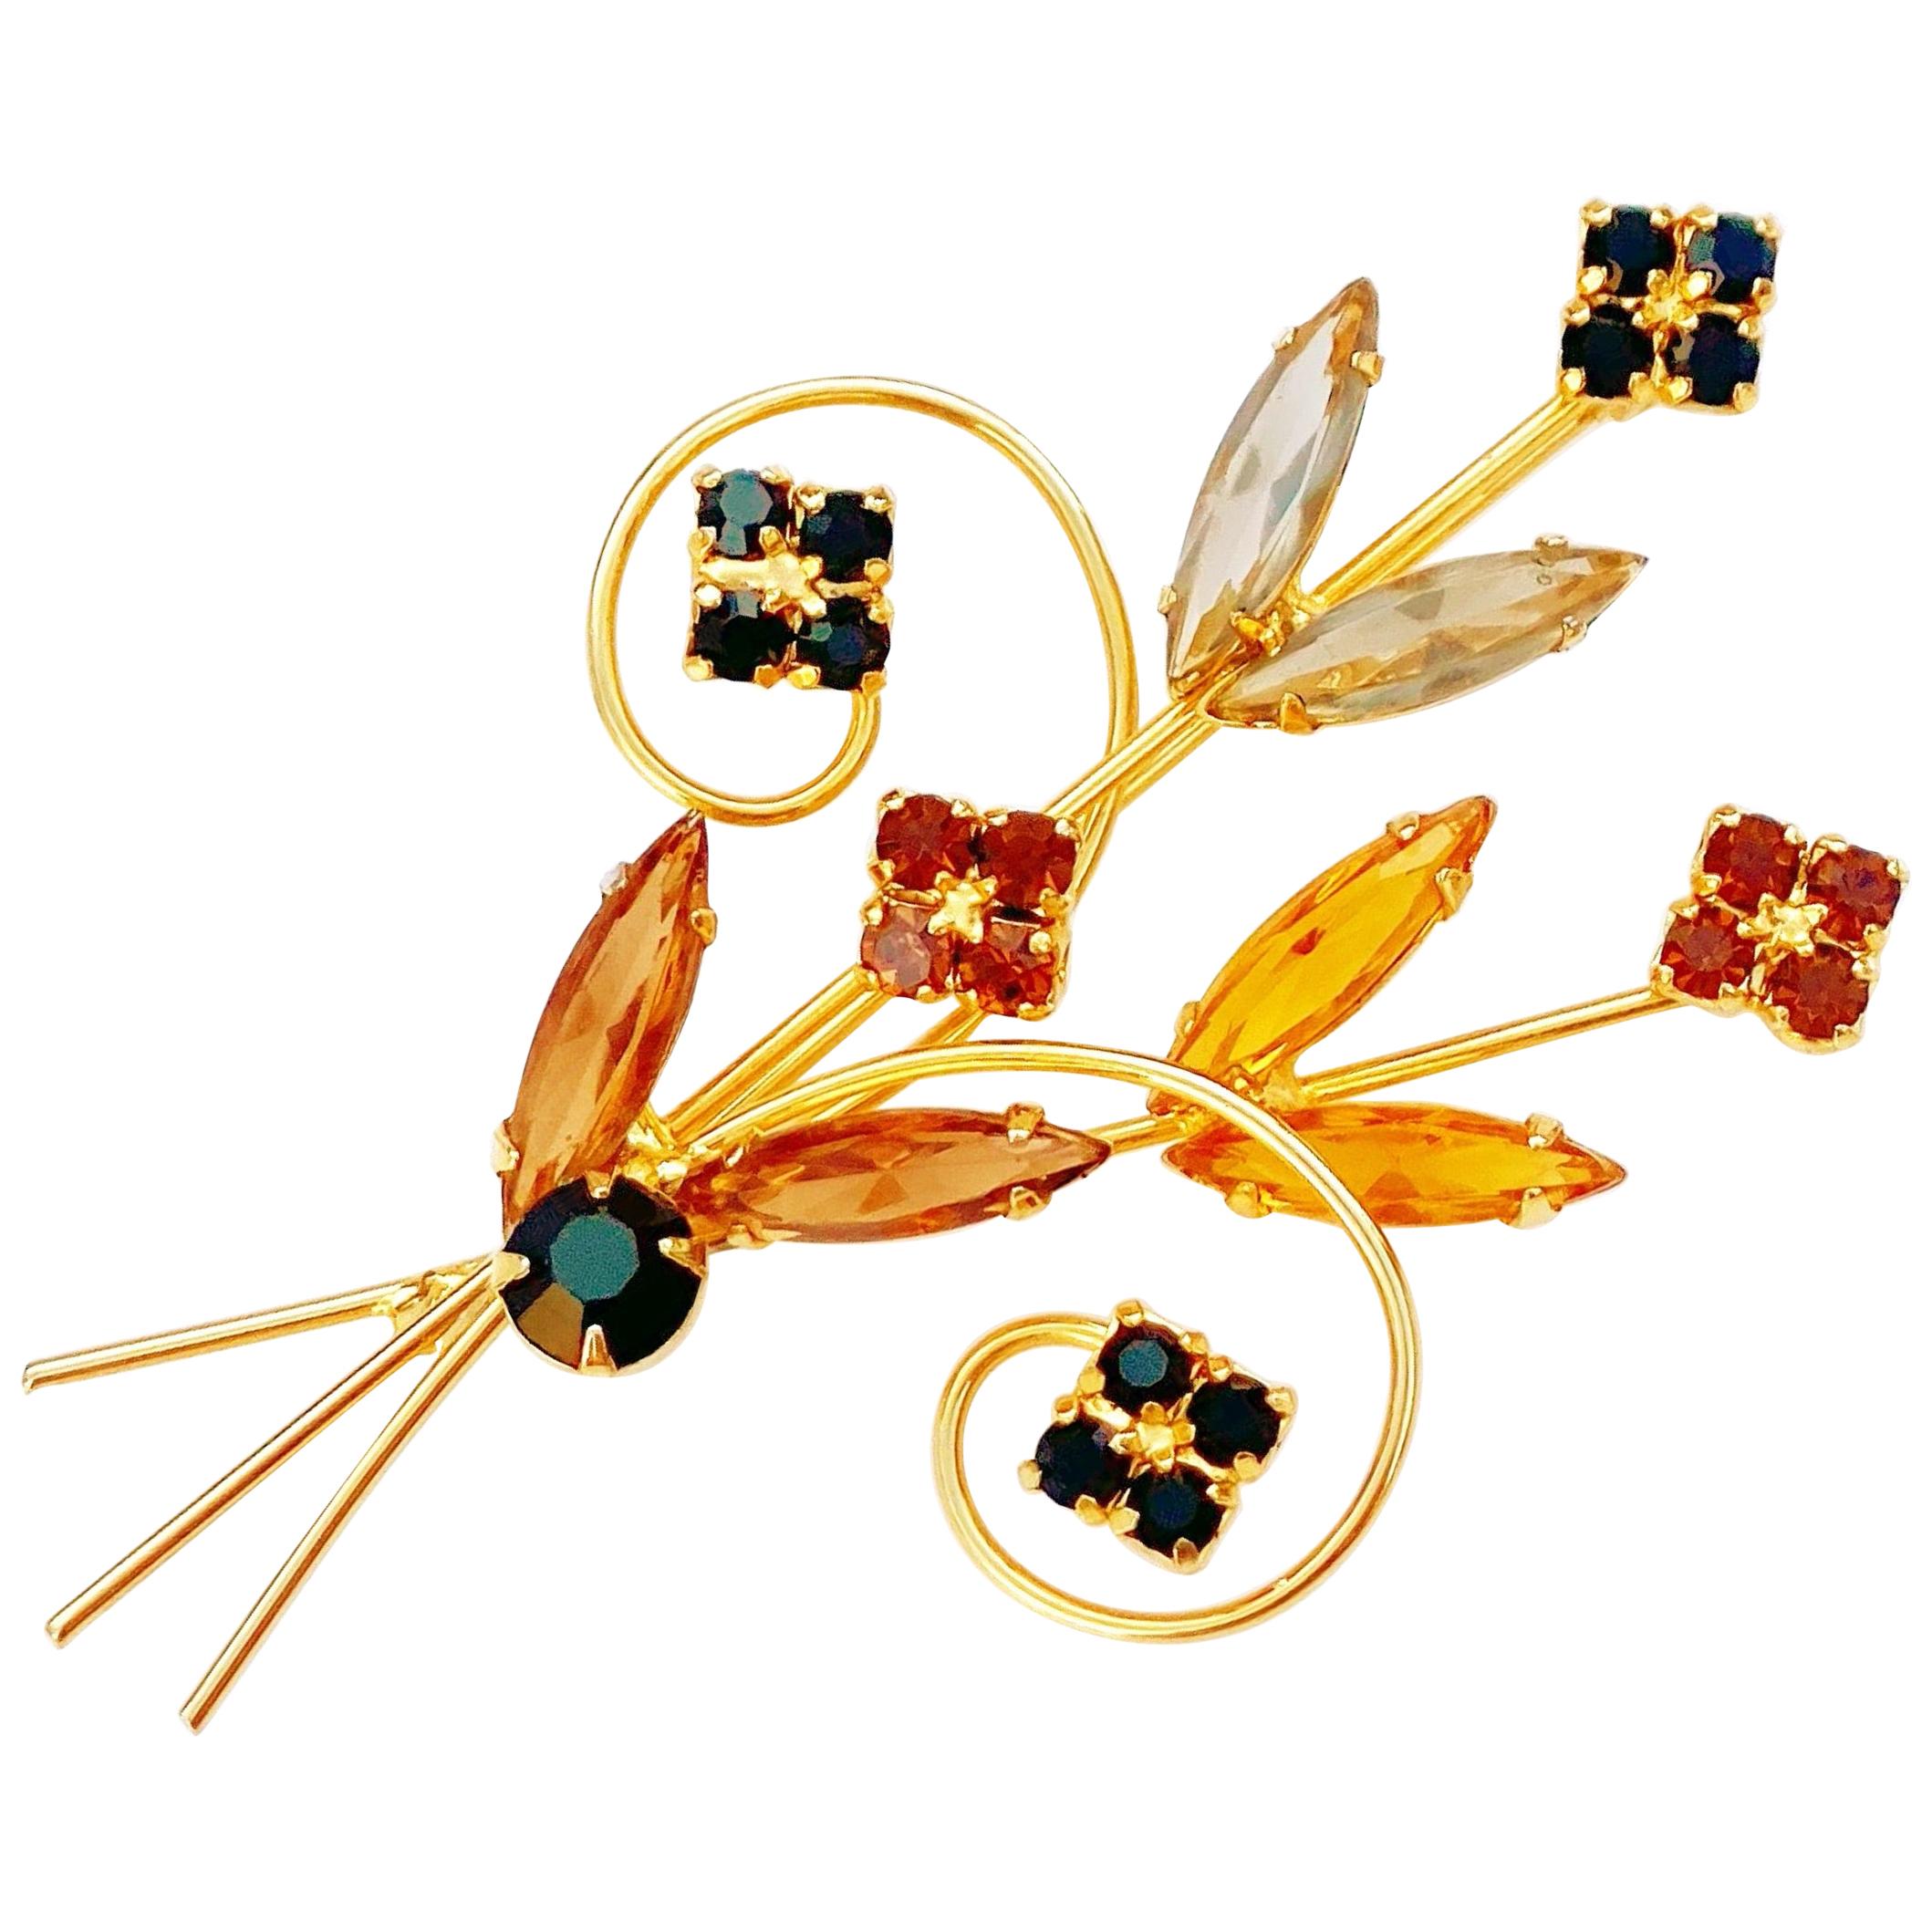 Vintage Gilded Flower Bouquet Brooch with Topaz and Garnet Crystals, 1950s